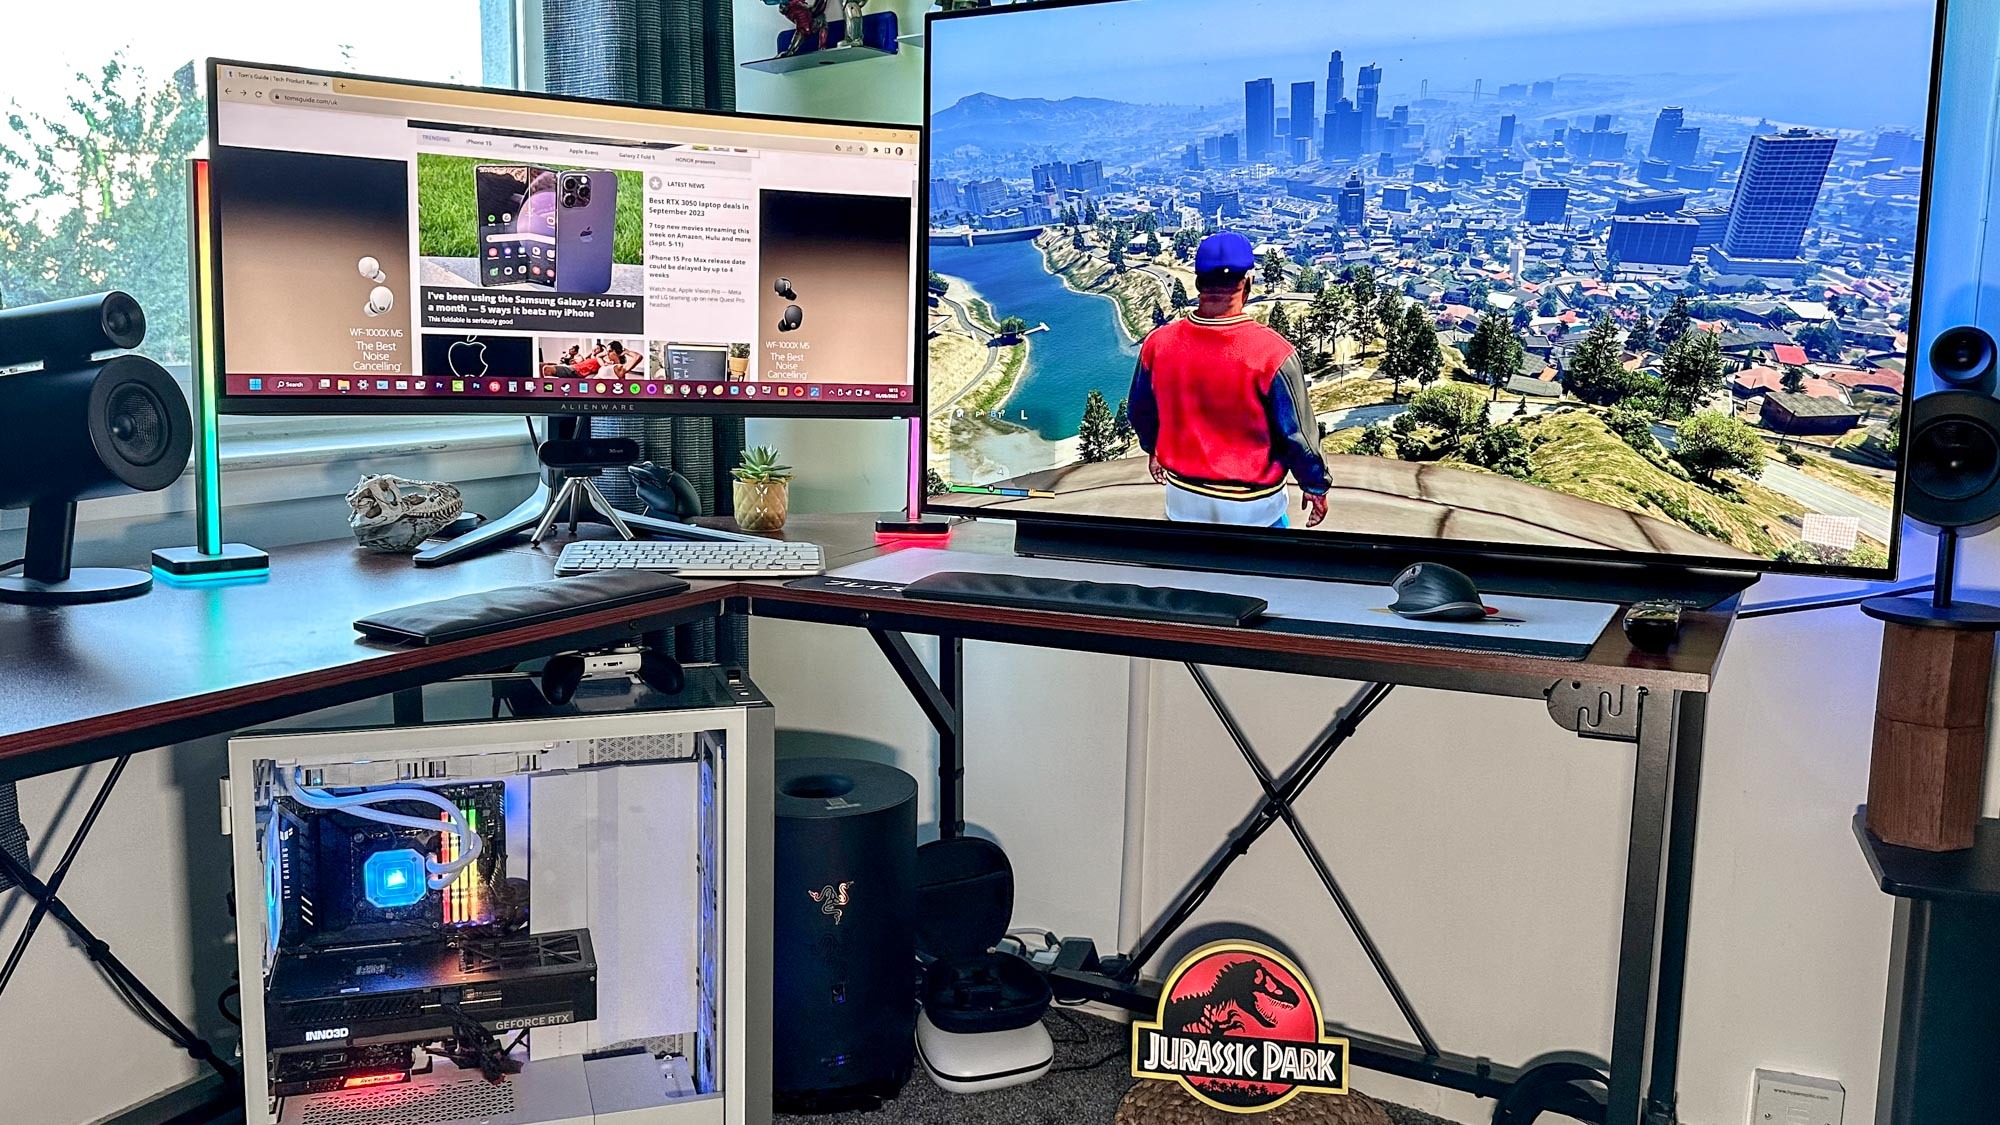 26 Best Gaming Setups of 2020 – With Prices, Owners' Tips, Full